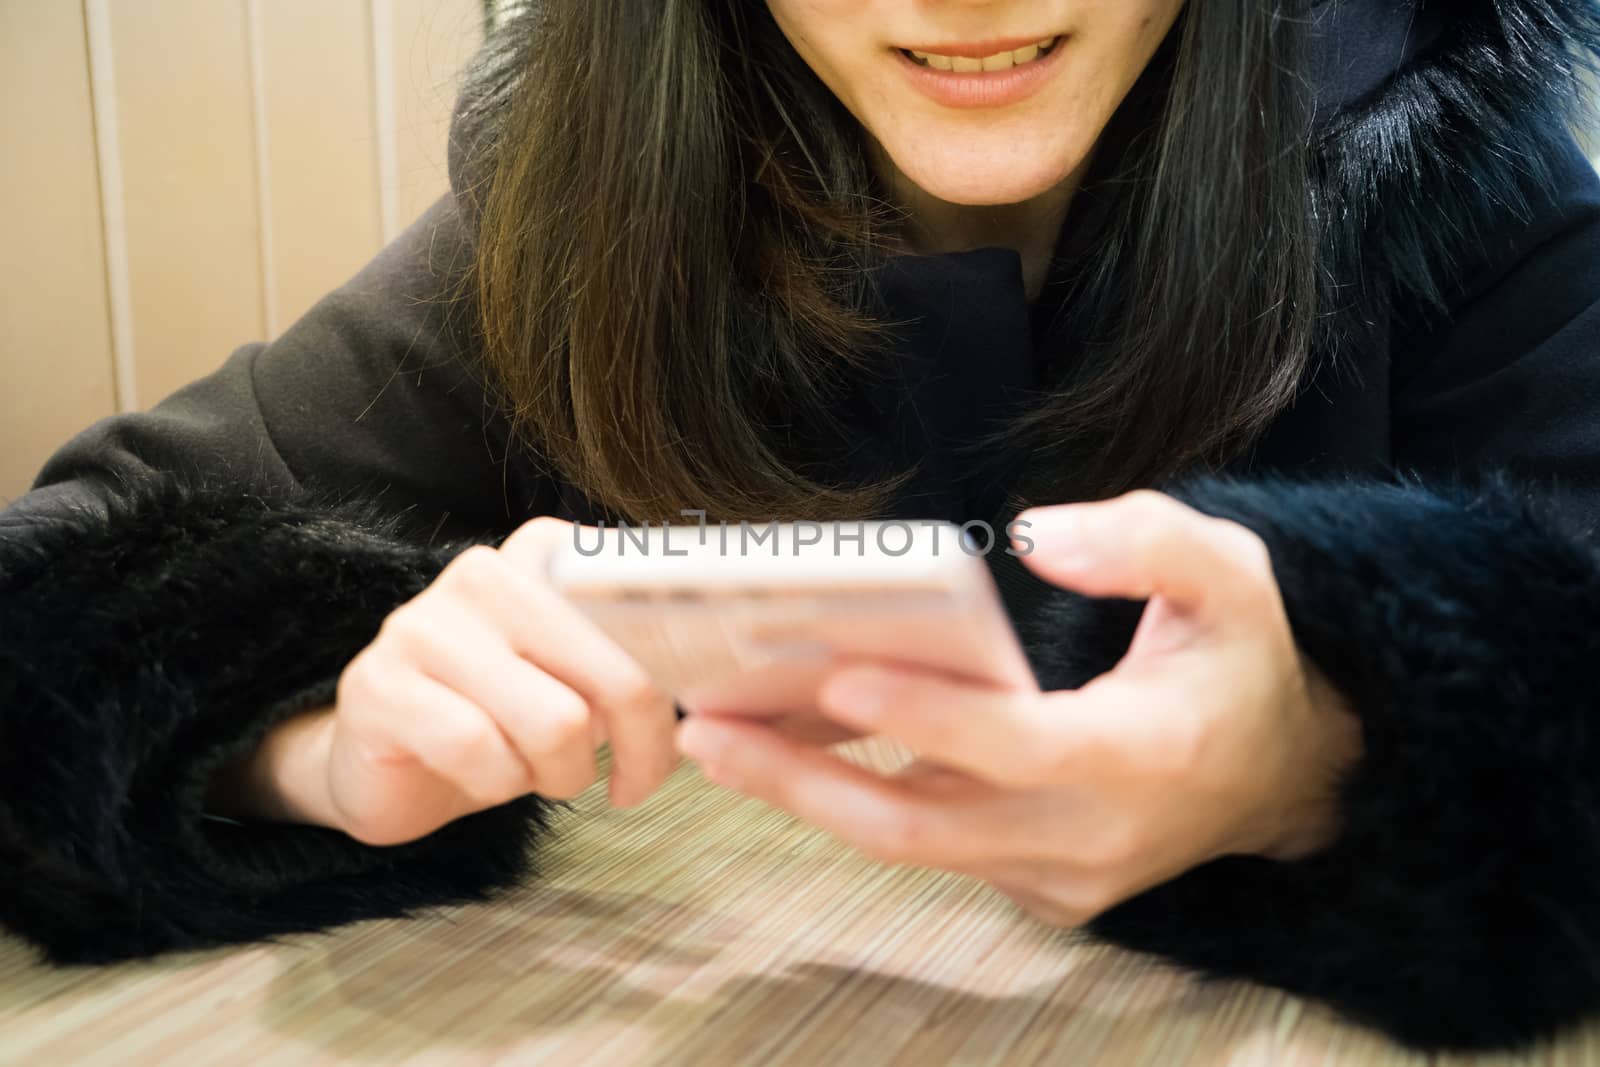 Socialholic young woman smile to her smart phone